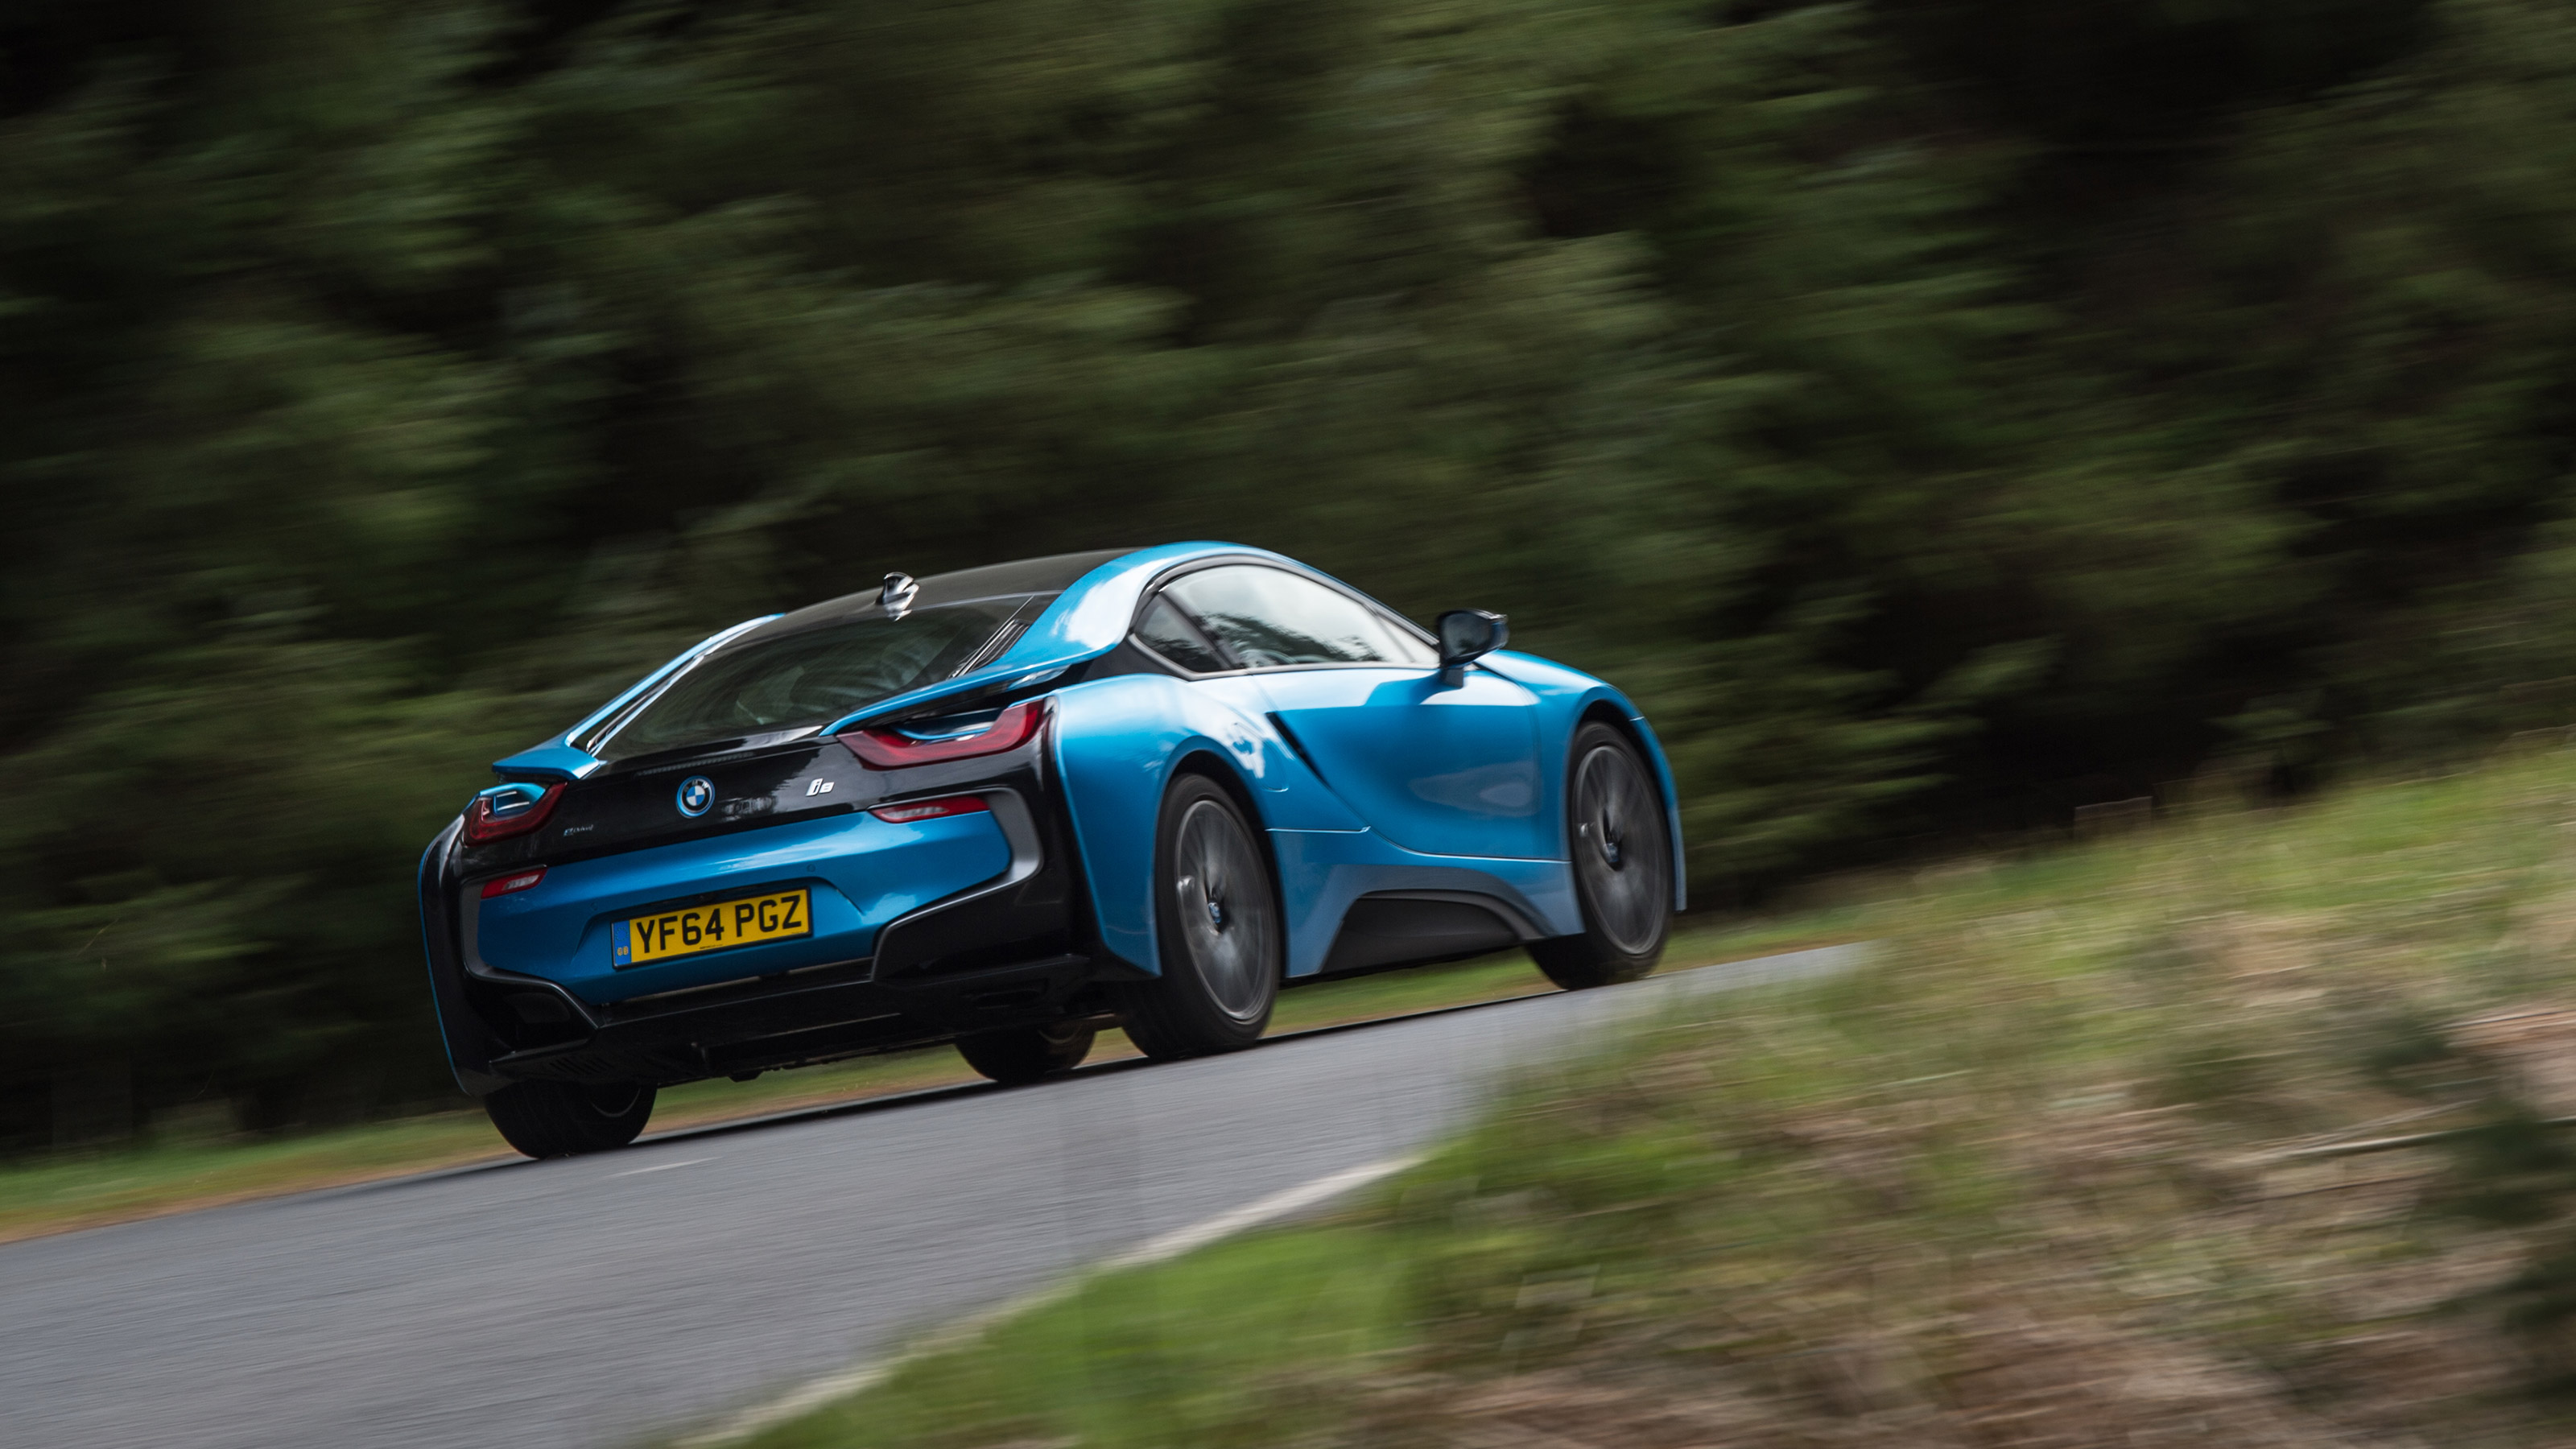 41 HQ Photos Bmw Electric Sports Car I8 Price - Bmw I8 Price In India 2020 Bmw I8 Starting Price Images Mileage Specs And Reviews The Financial Express